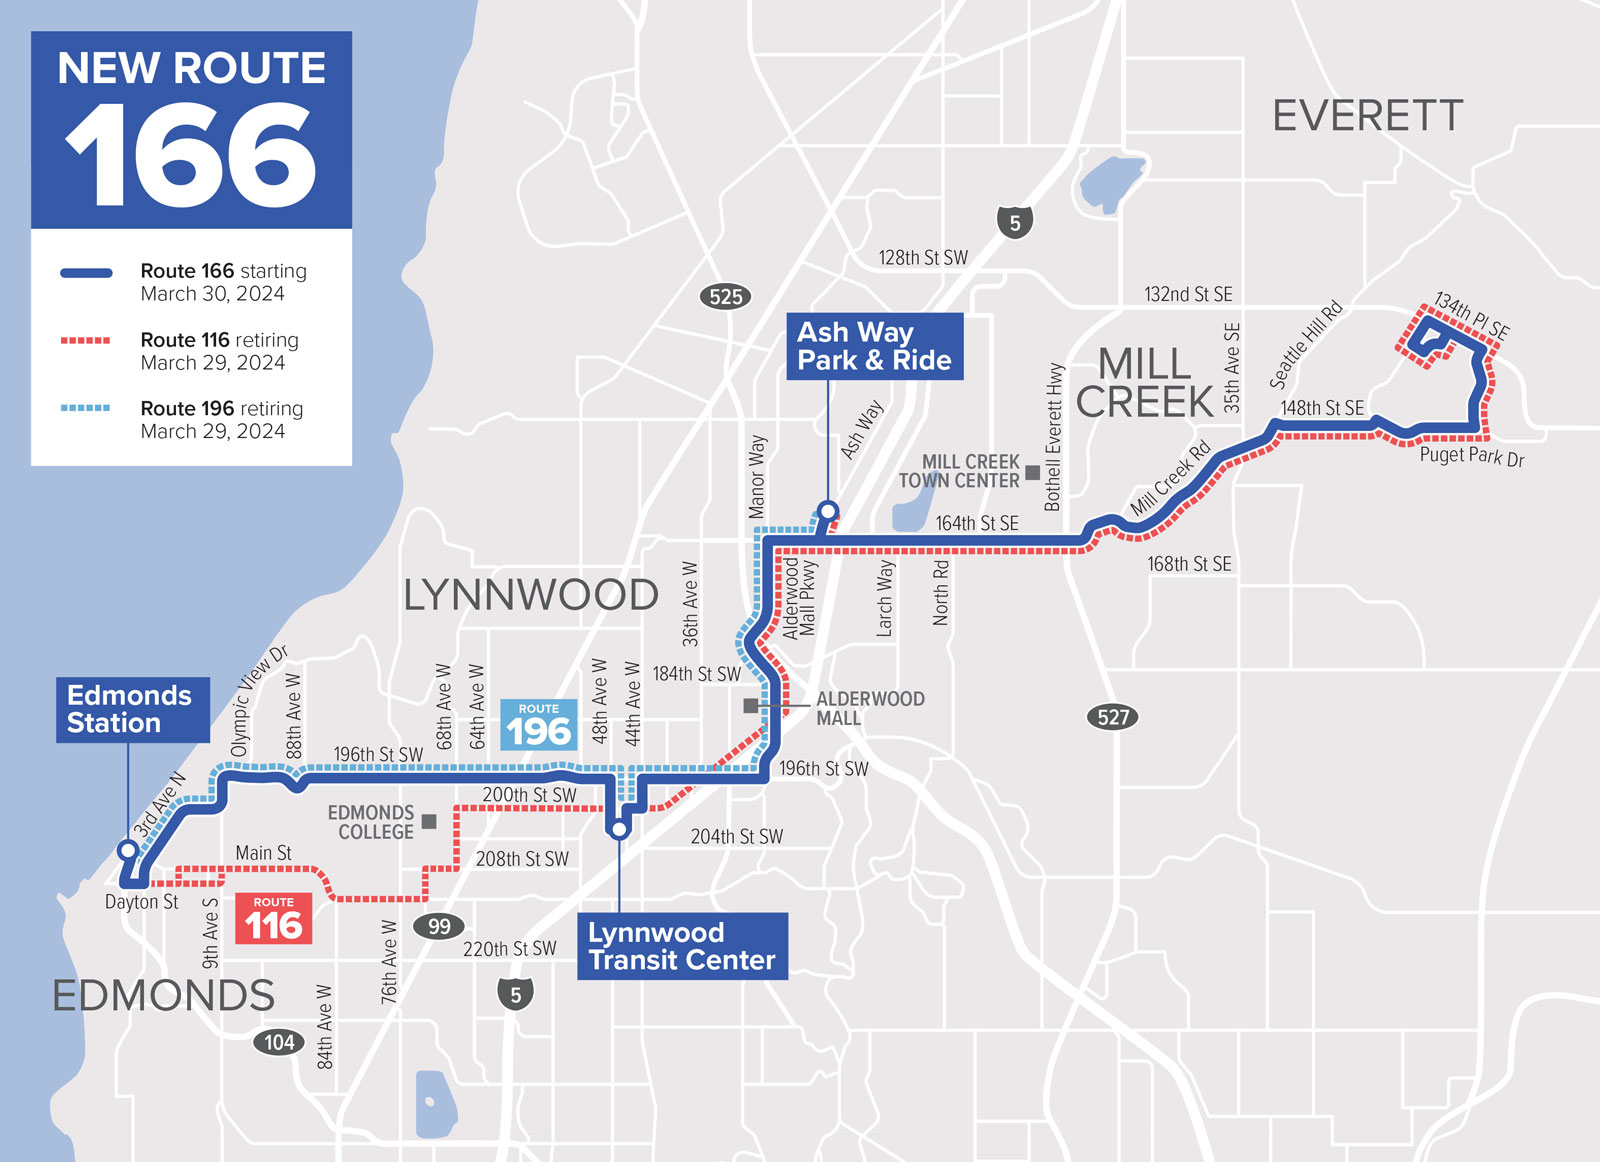 Map of Route 166 connecting Silver Firs and Edmonds via Seattle Hill Rd, 164th St, Alderwood Mall, 196th St, Lynnwood Convention Center, Lynnwood Transit Center, and Edmonds College. Showcases links to Swift Blue, Green, and Orange lines, and highlights stops for Routes 115, 116, and 196. Indicates 30-minute service intervals during weekday peak times, starting March 2024, with a note on planned frequency increase and reduced weekend service initially.